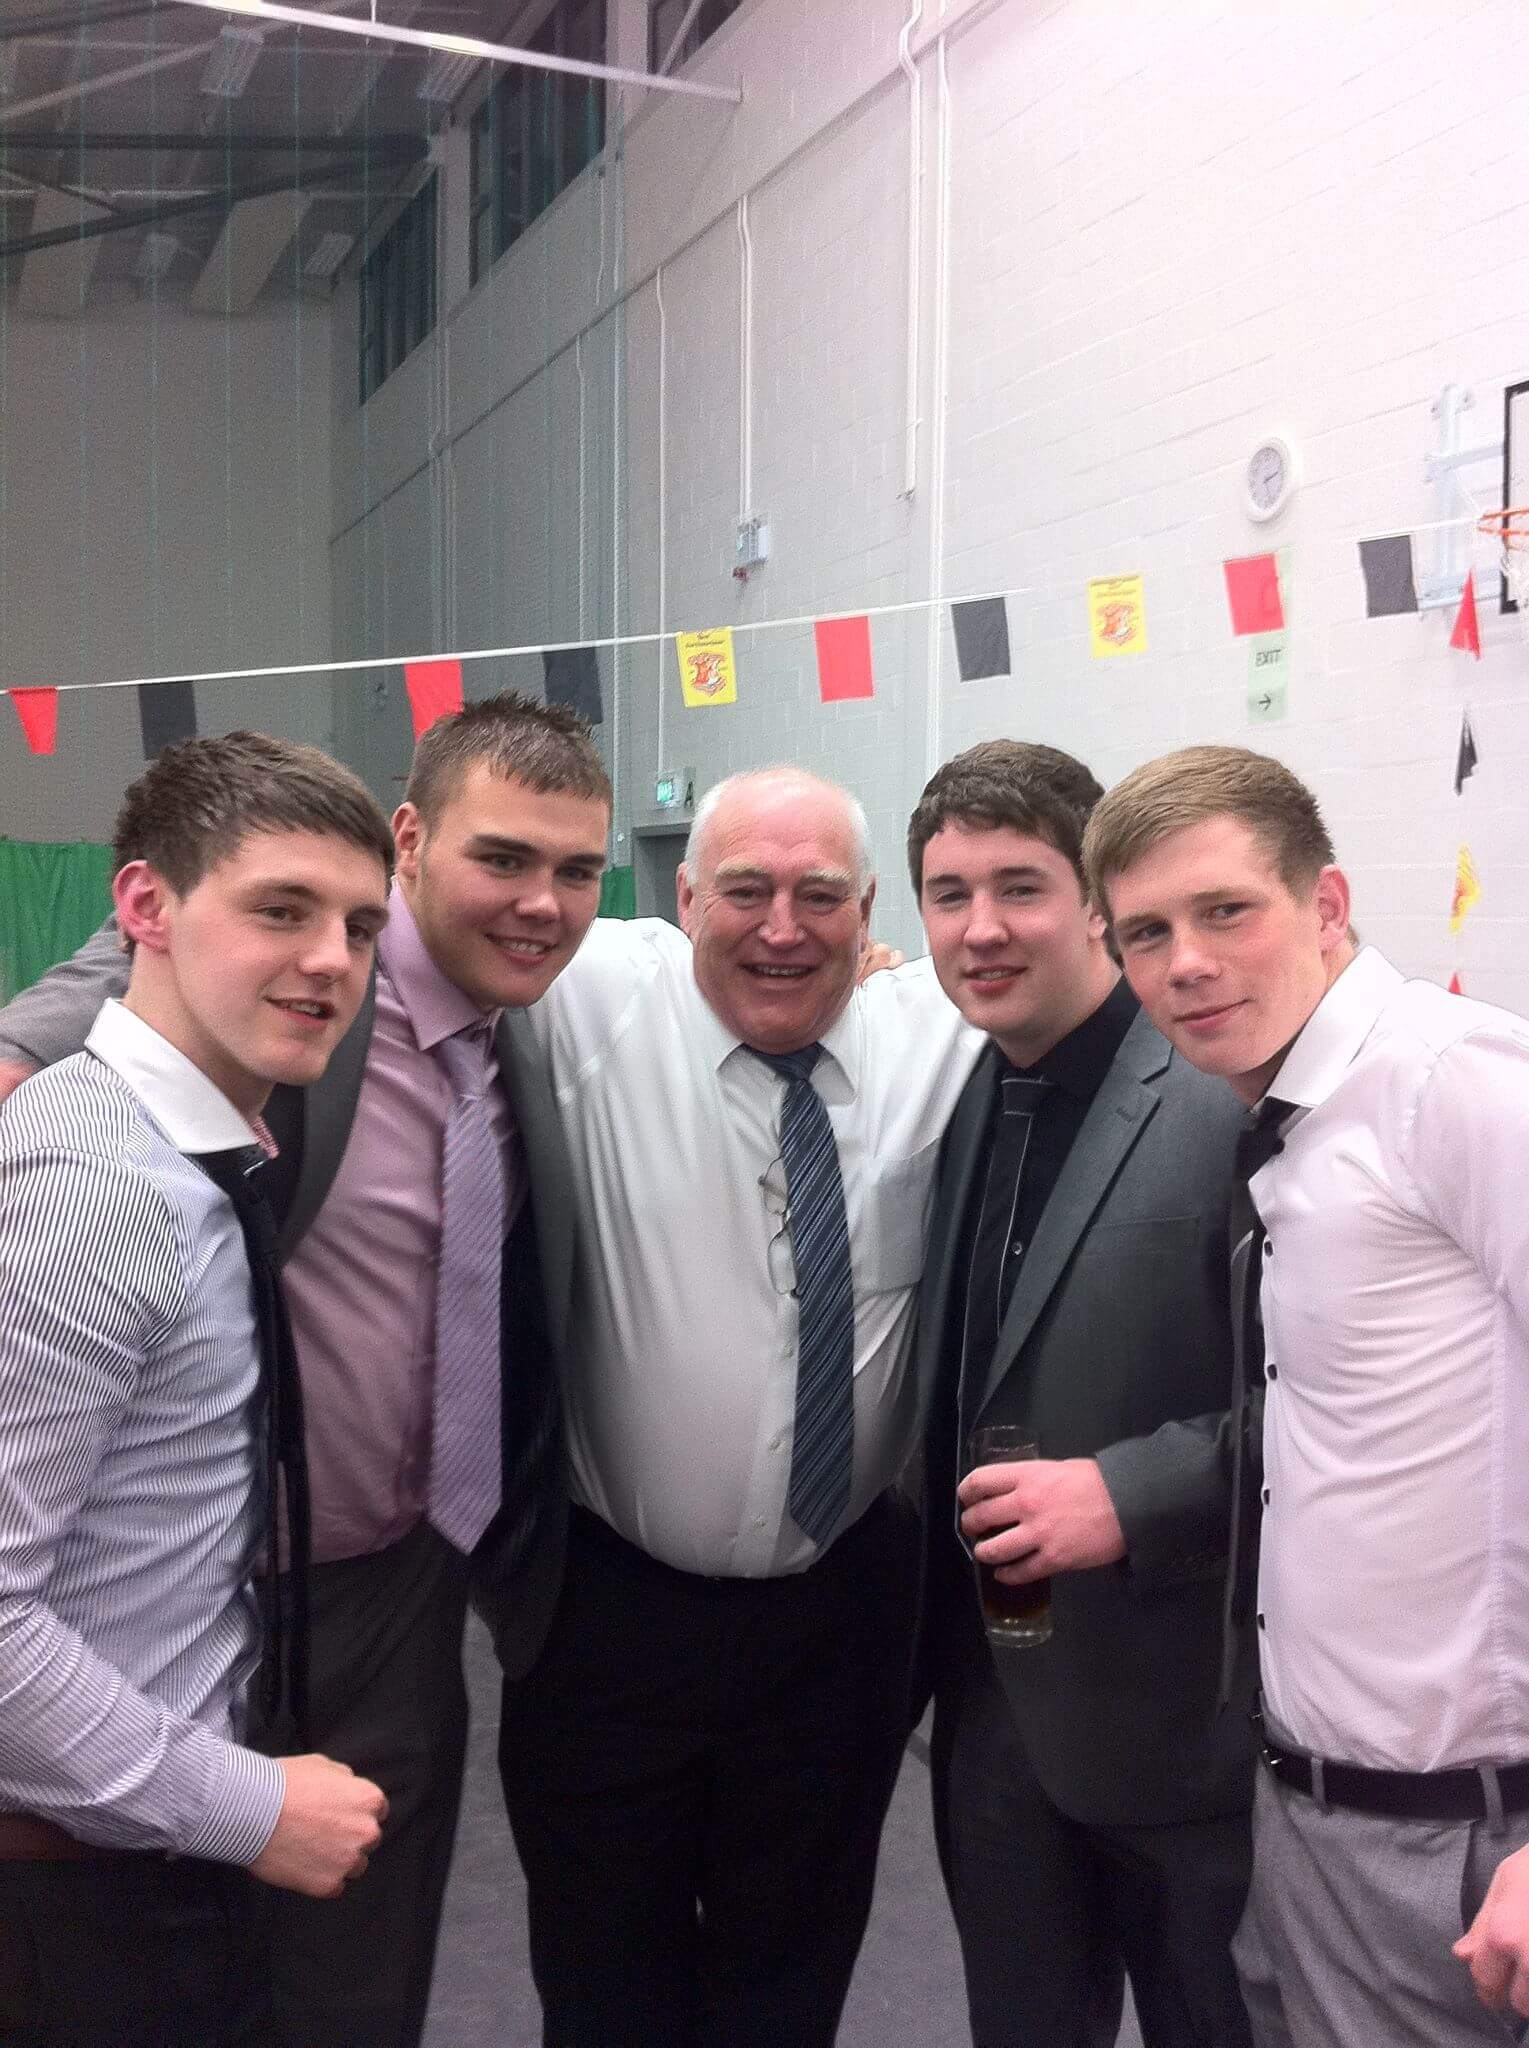 Gerry Duffy proud Principle with all the School Team Captains at PPU dinner Friday 18th May. What a great night.